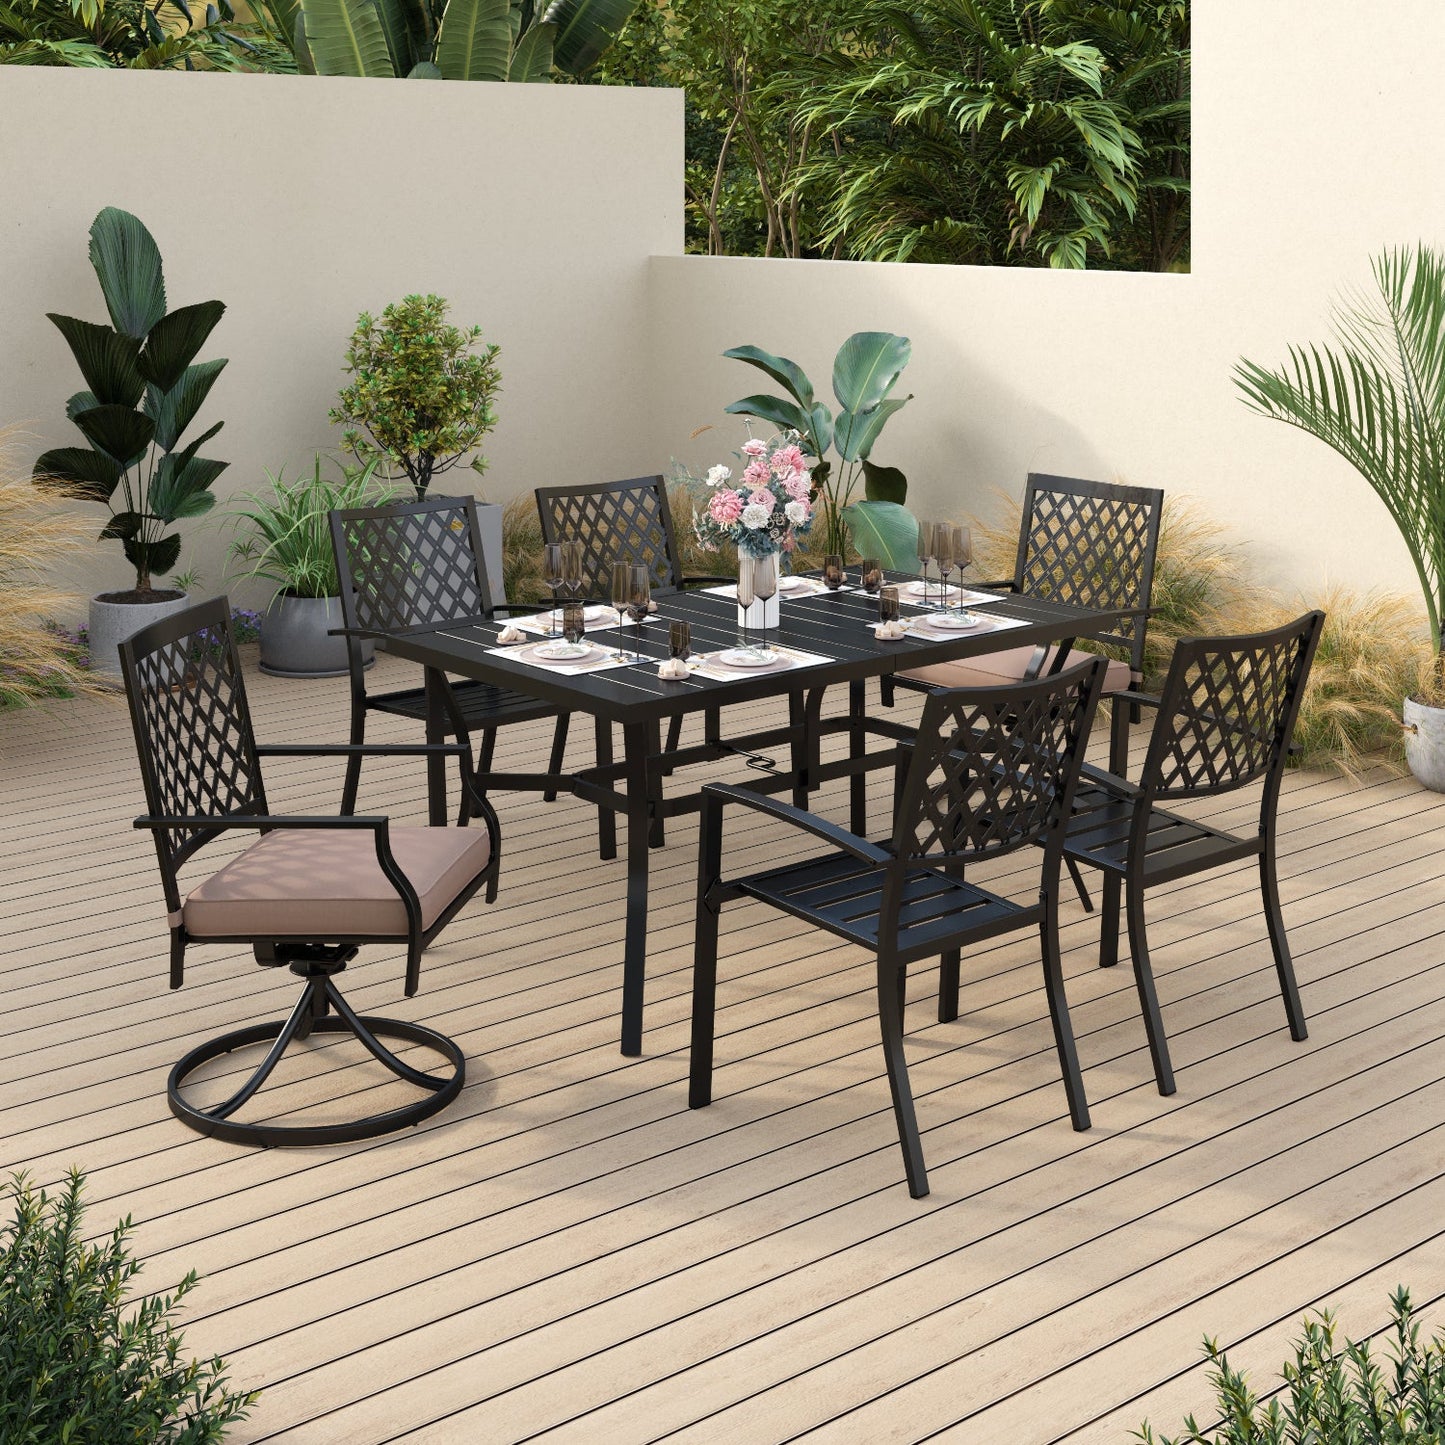 Sophia & William 7 Piece Patio Dining Set Outdoor Furniture with 6 Piece Chairs and 1 Piece Rectangular Dining Wood Table